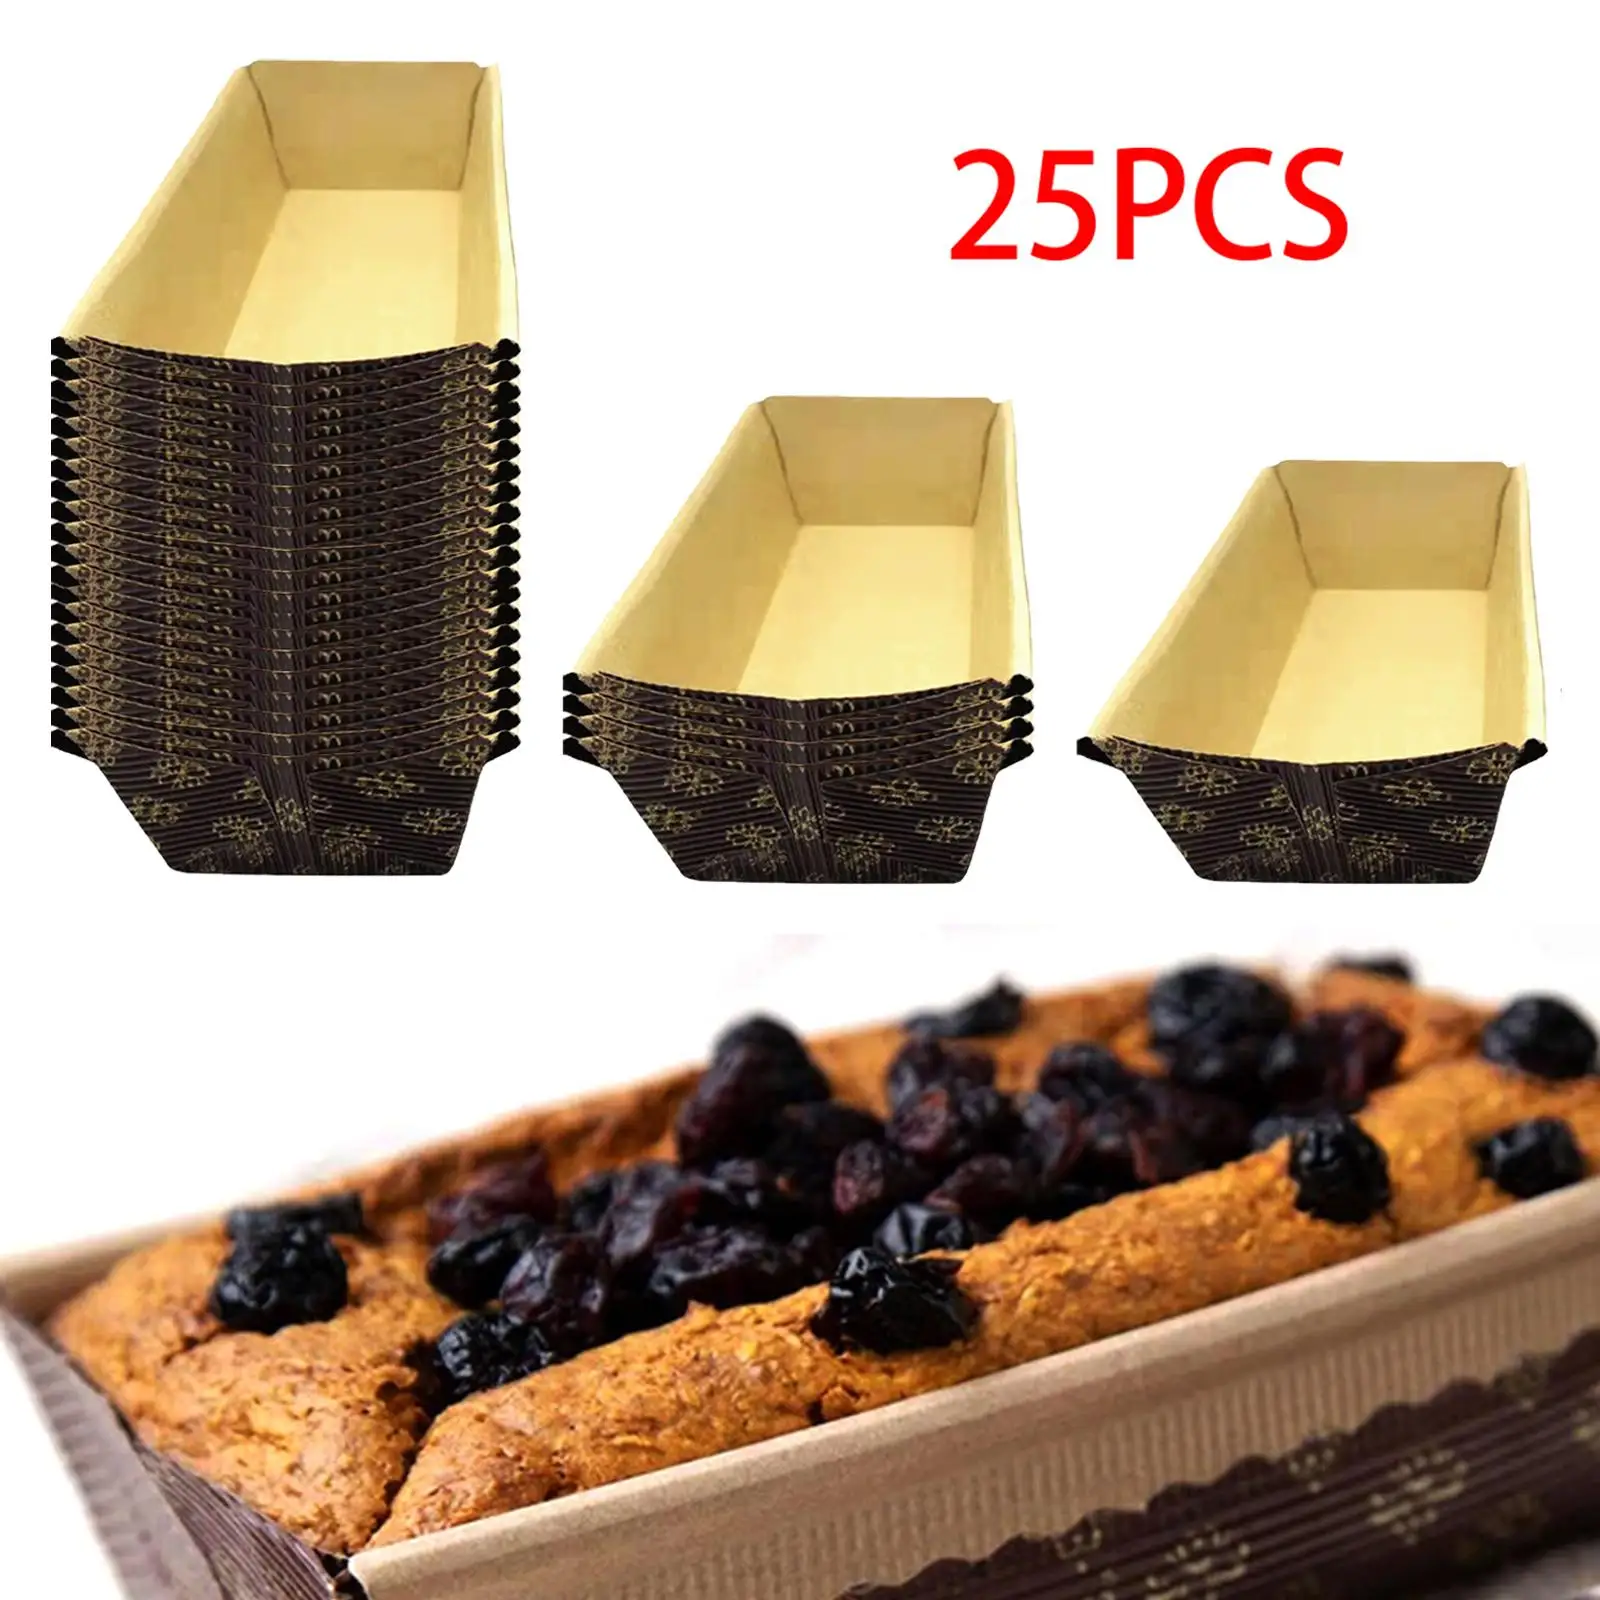 25 Pieces Baking Cups Decoration Baking Tools Muffin Paper Cases for Party